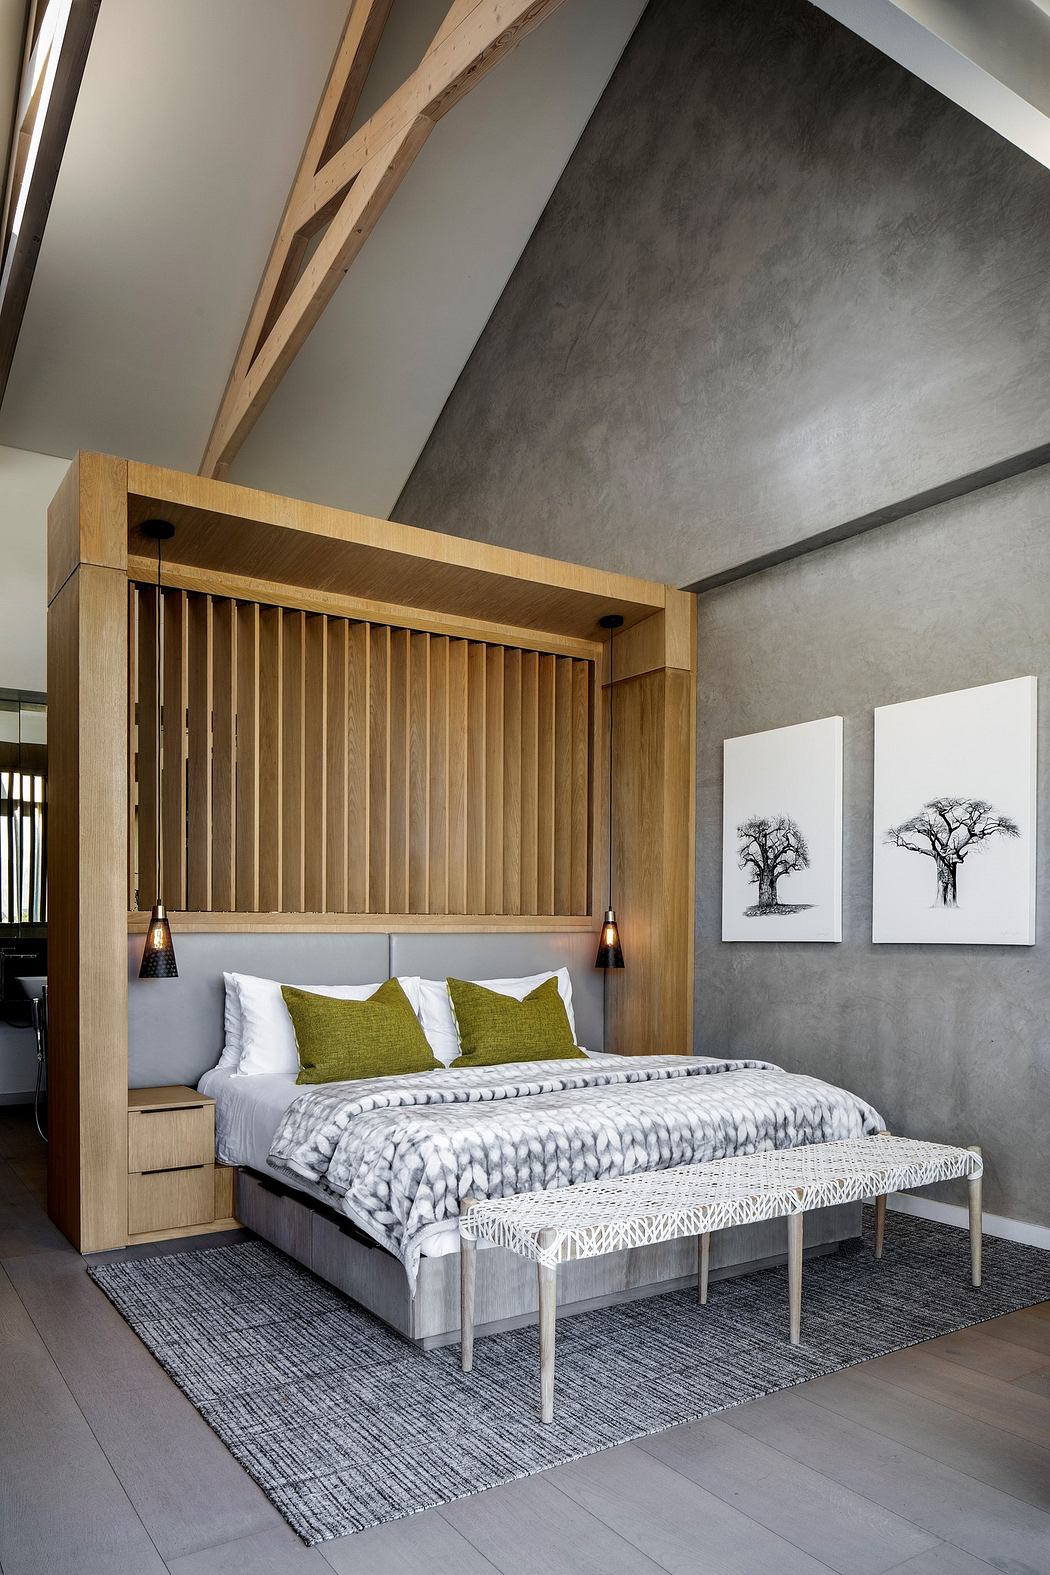 Modern bedroom with wooden bed frame, grey walls, and art decor.